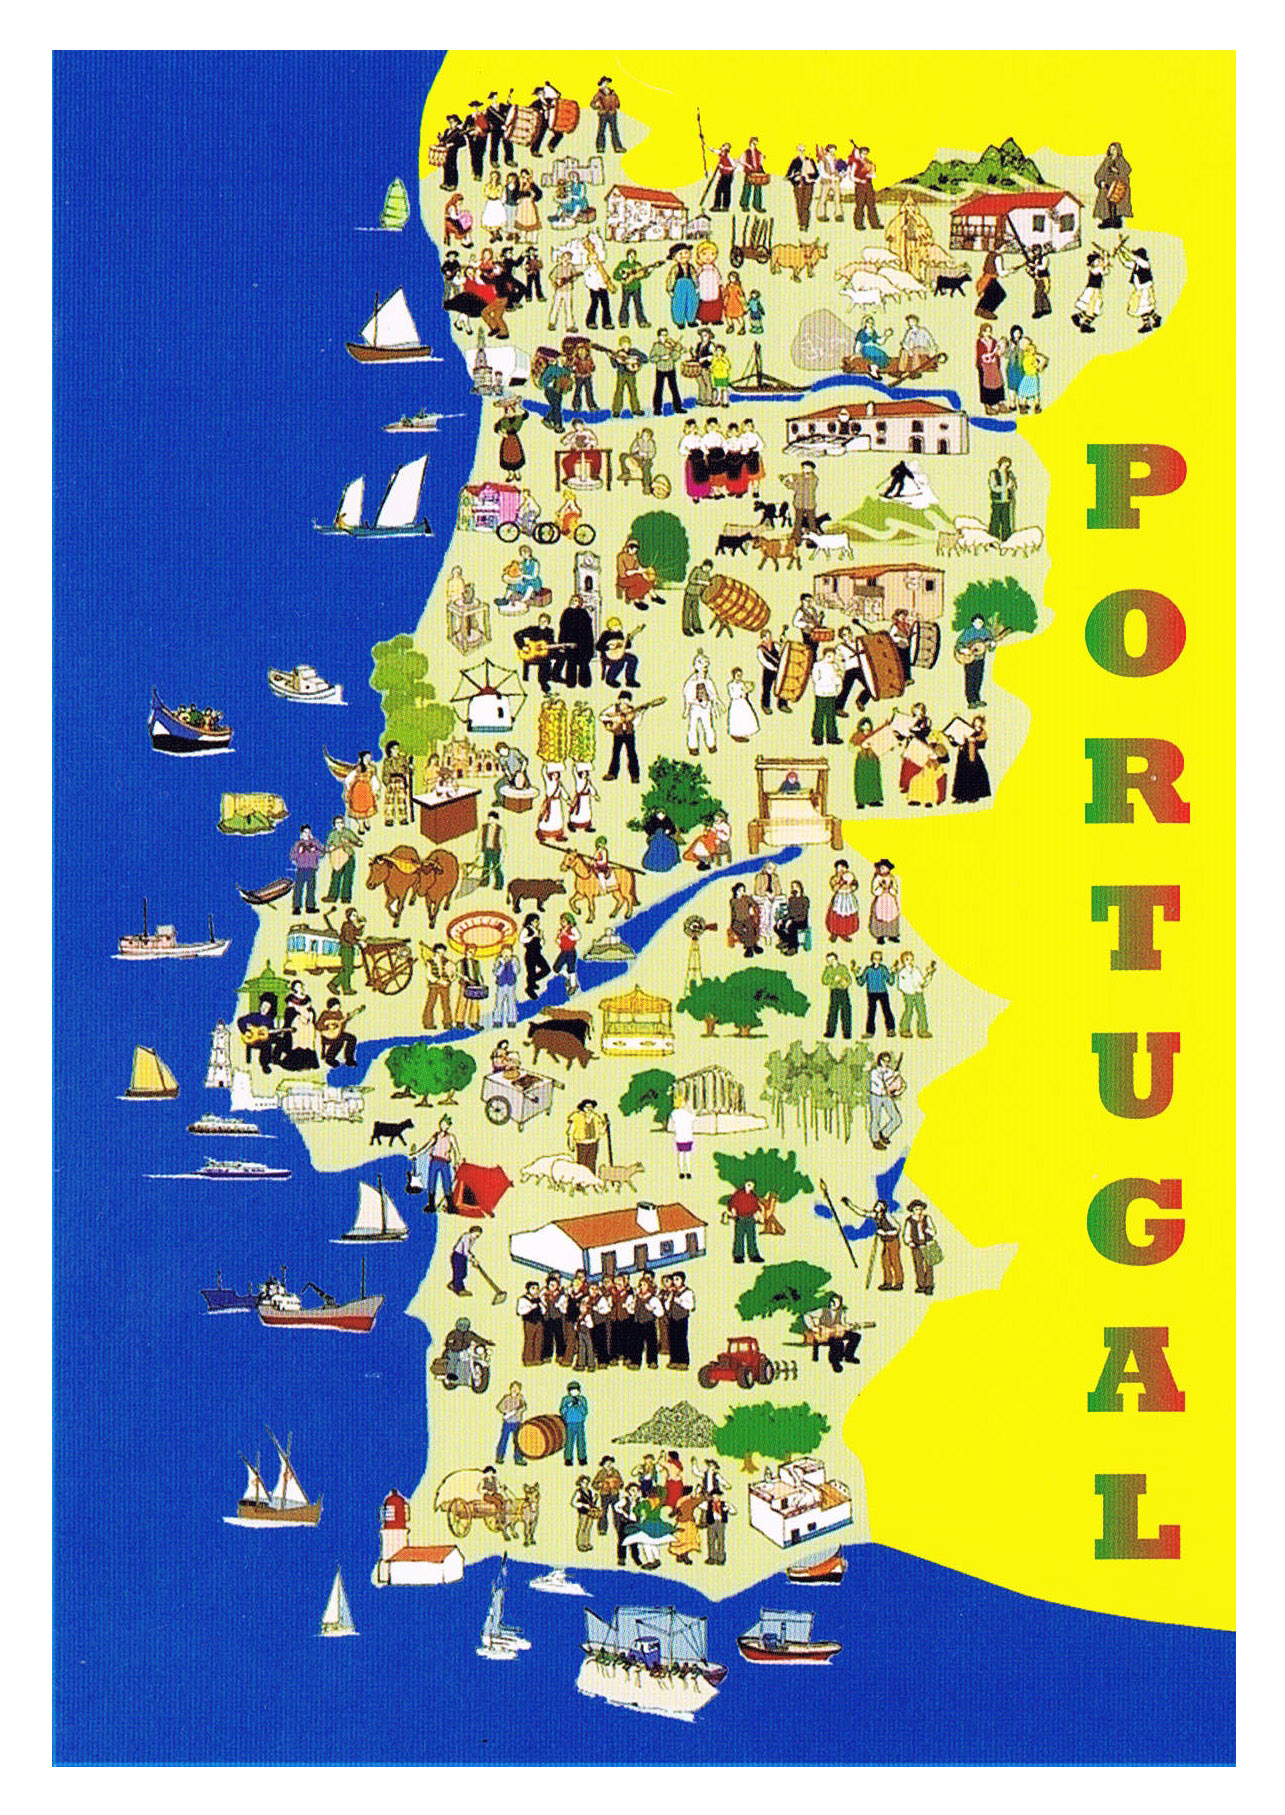 travel map of portugal